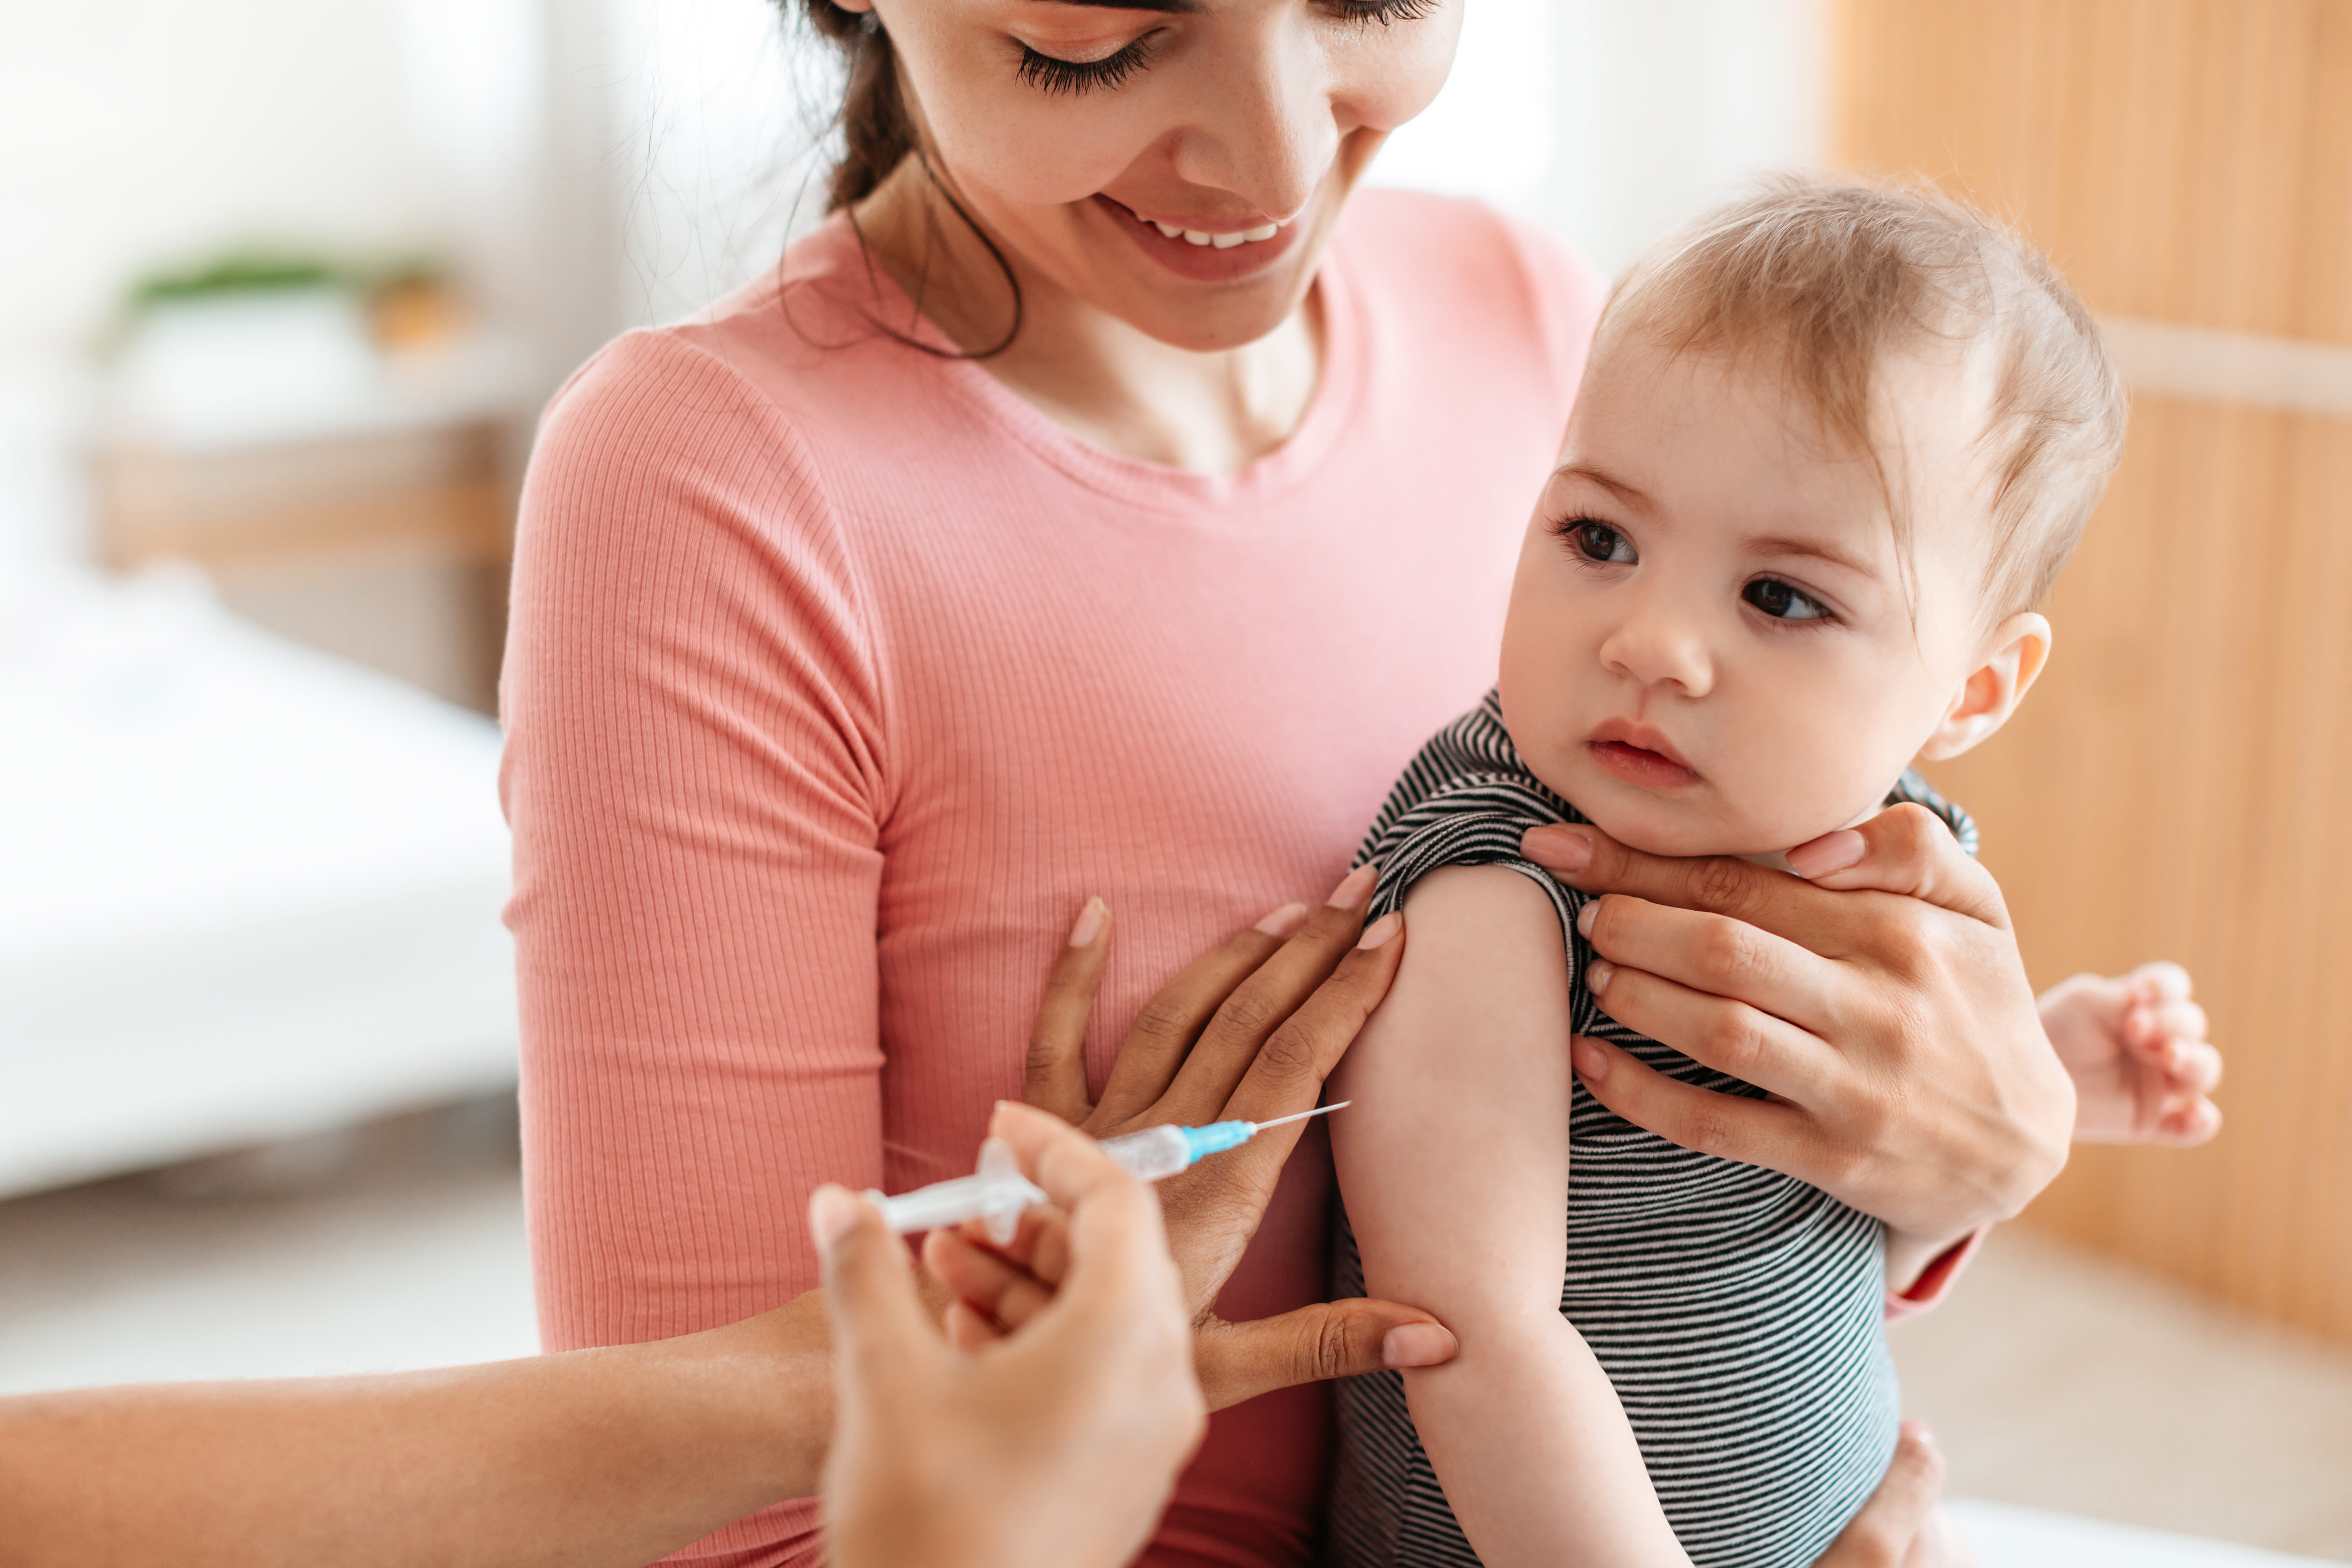 Parents urged to get children vaccinated as whooping cough deaths rise